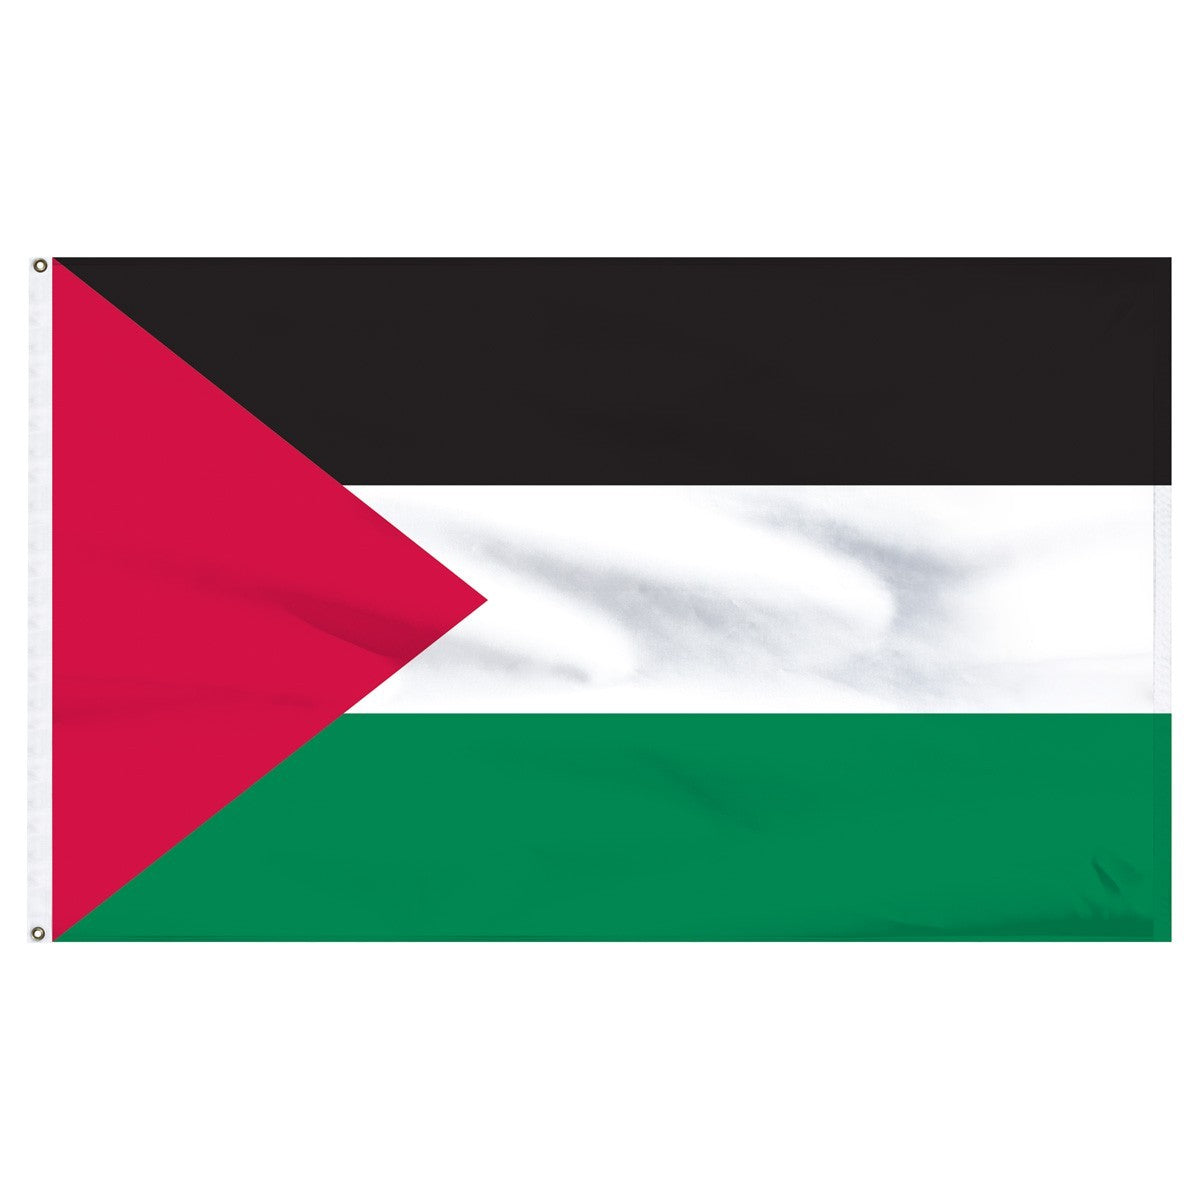 Palestine flags for sale